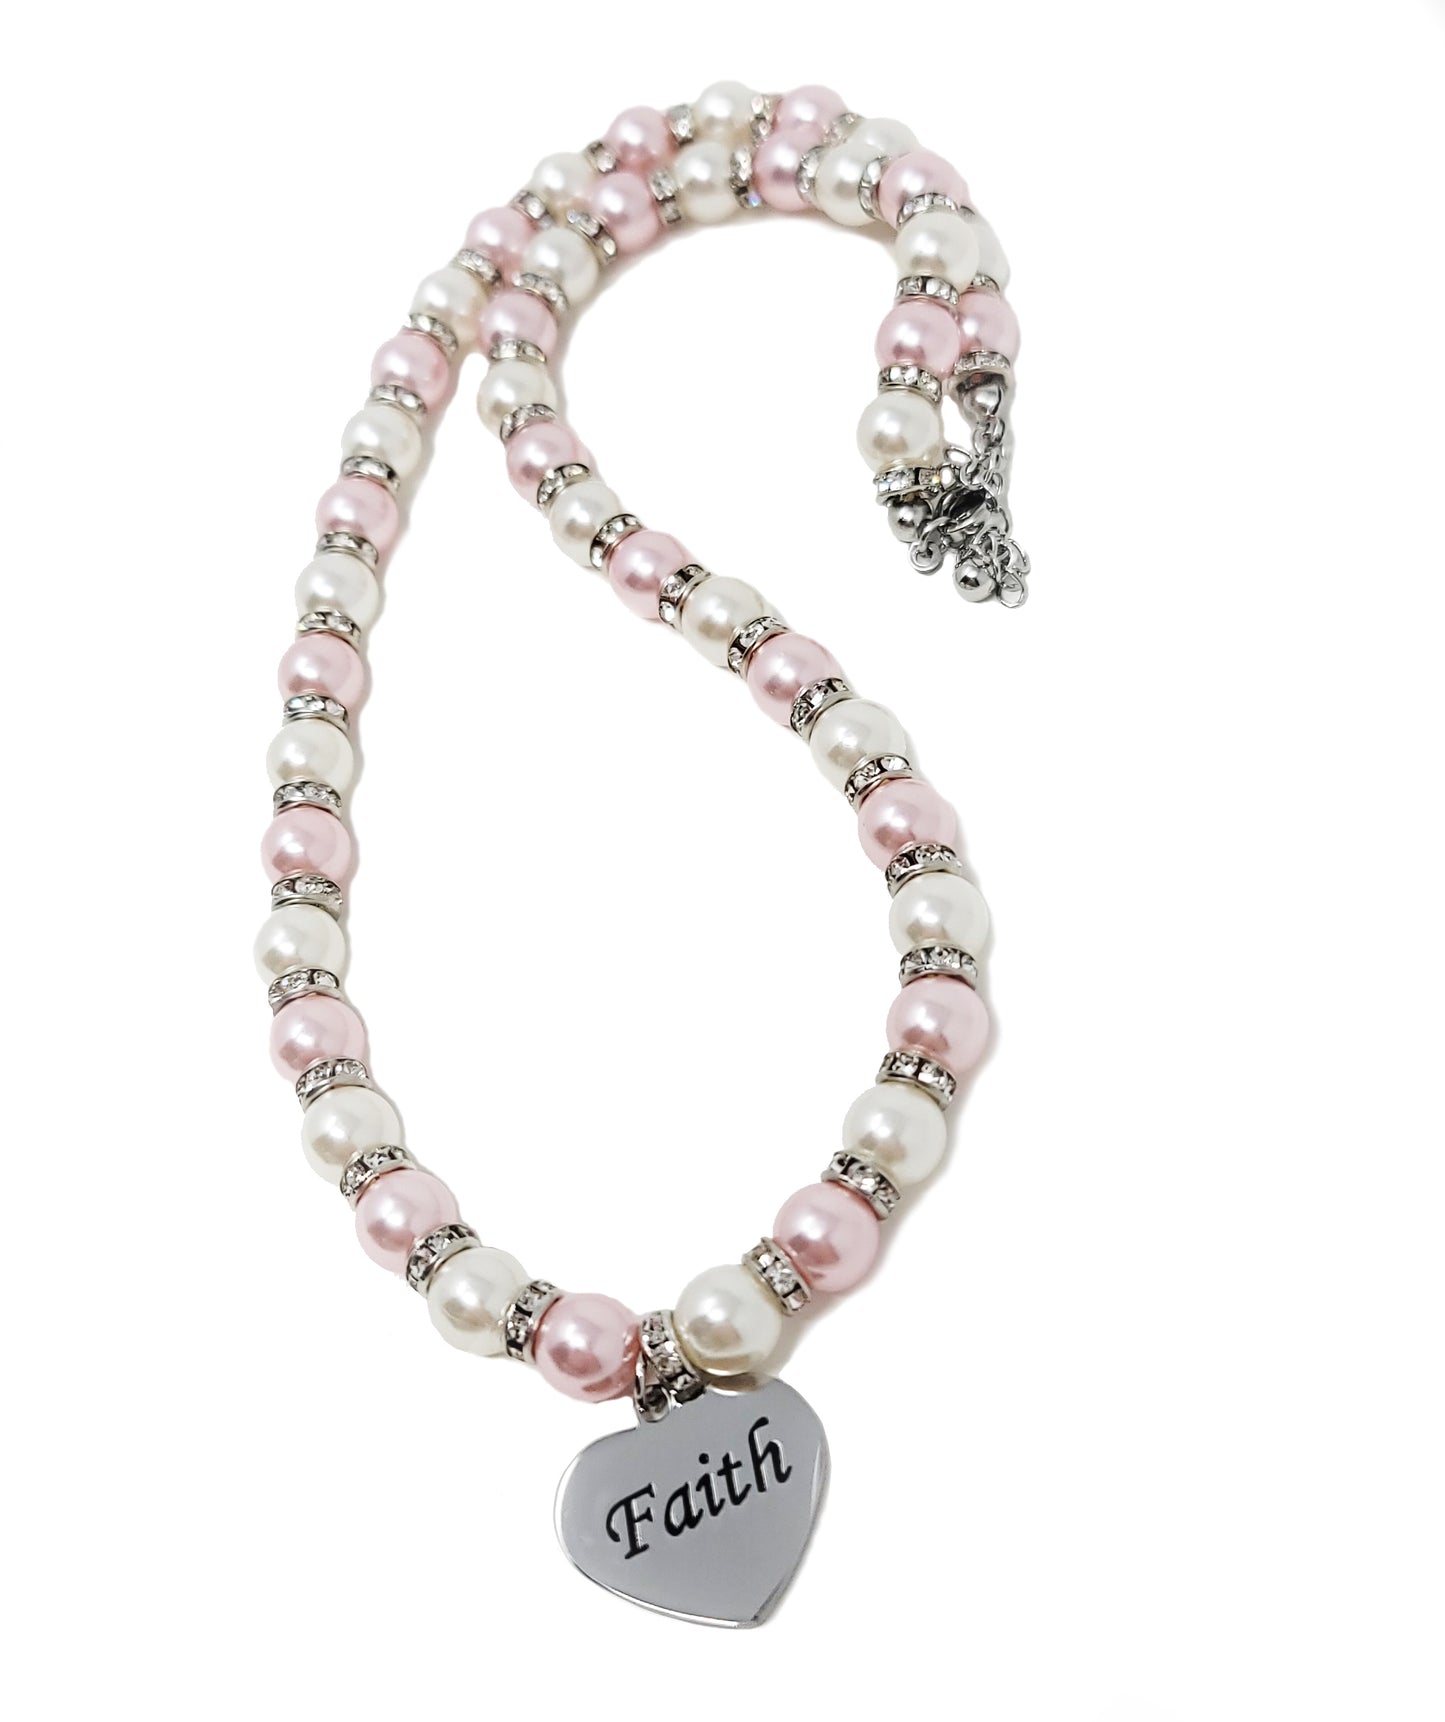 Faux Pink and White Pearl Necklace with an Engraved  Silver Heart Pendant - Baptism Gift for Girls